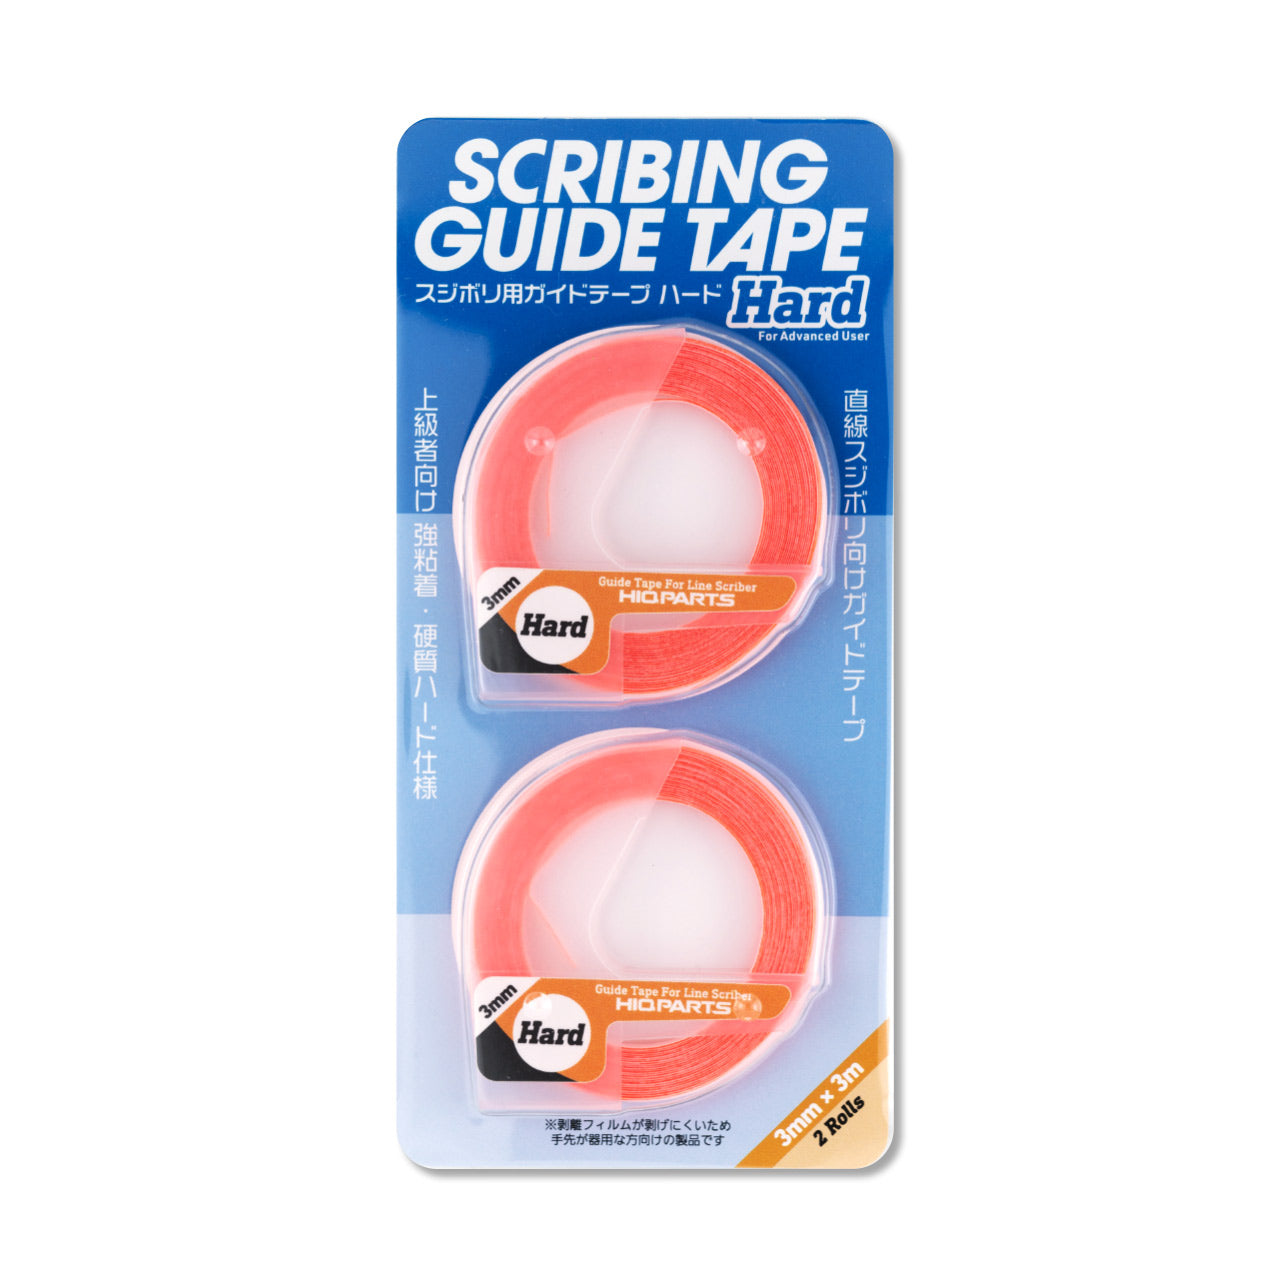 HiQ Parts Hard Surface Guide Tape for Scribing 3mm (3m, 2 Rolls)